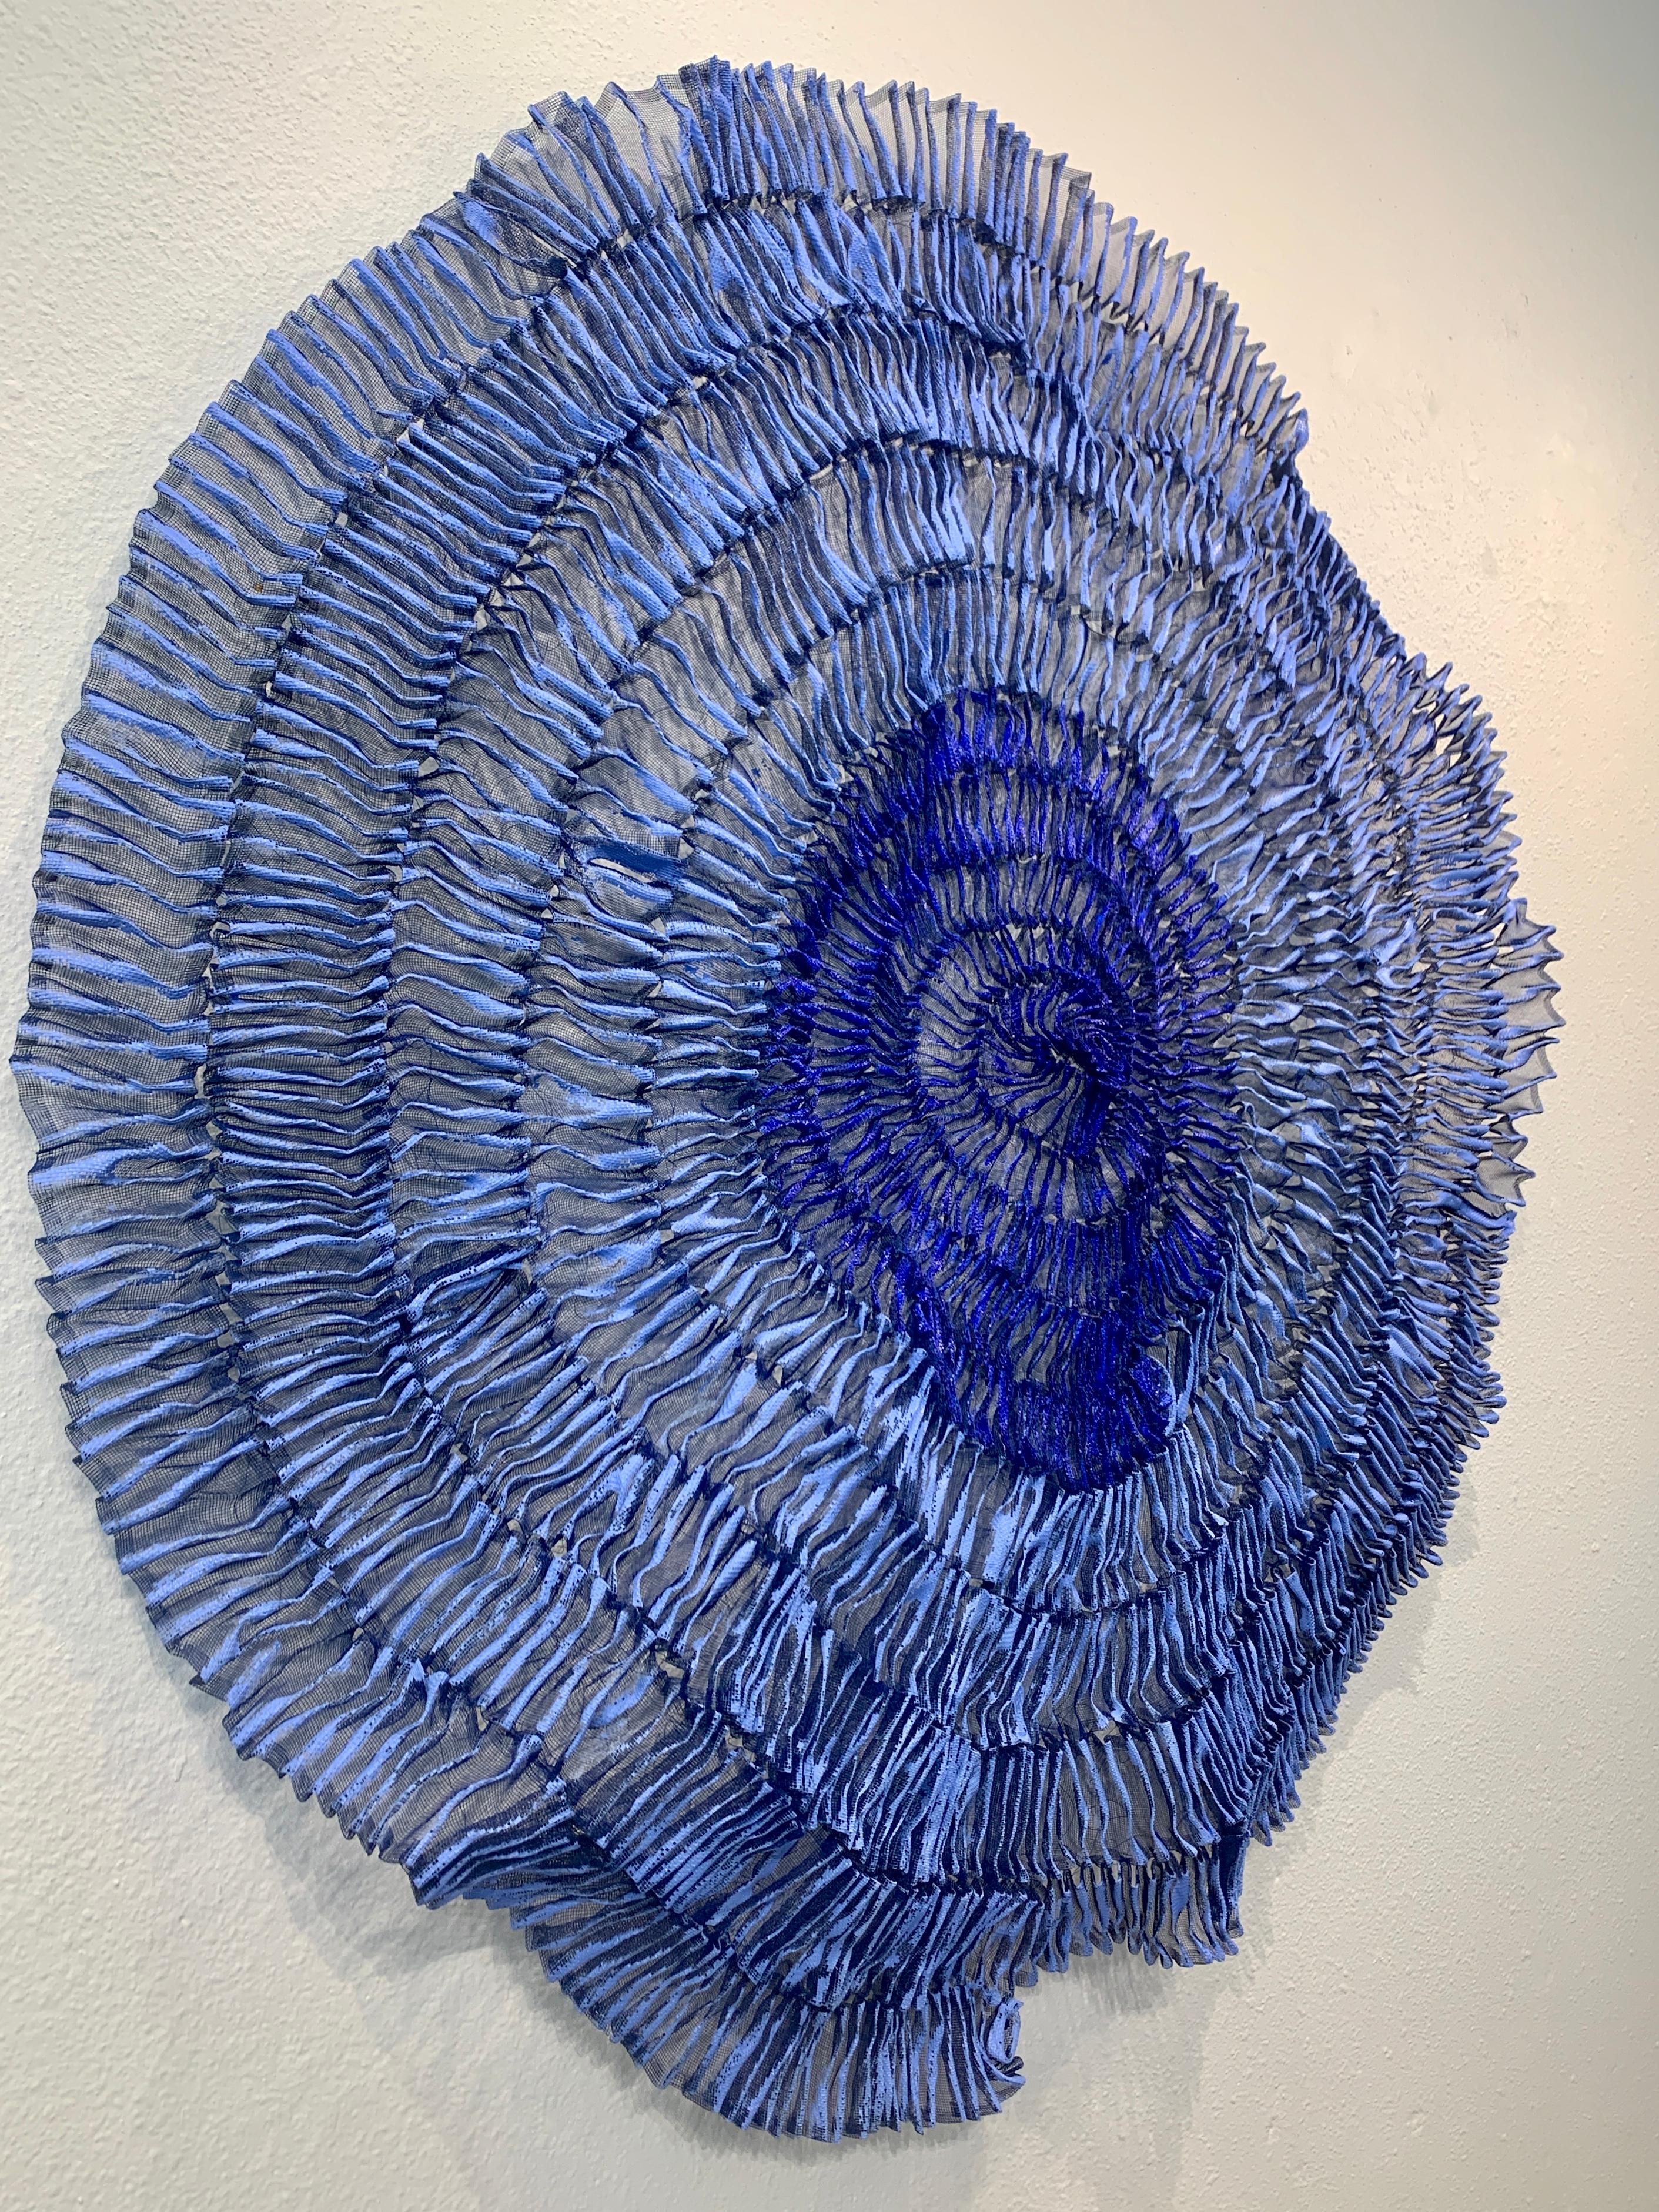 Sujoon II (Cornflower & Cobalt), Atticus Adams Mesh Wall Sculpture Screen Shadow

Metal fiber sculpture that incorporates fascinating light and shadow into its form.
​​
From Atticus Adams:
​
“I like to think of my work as Neo-Appalachian Folk